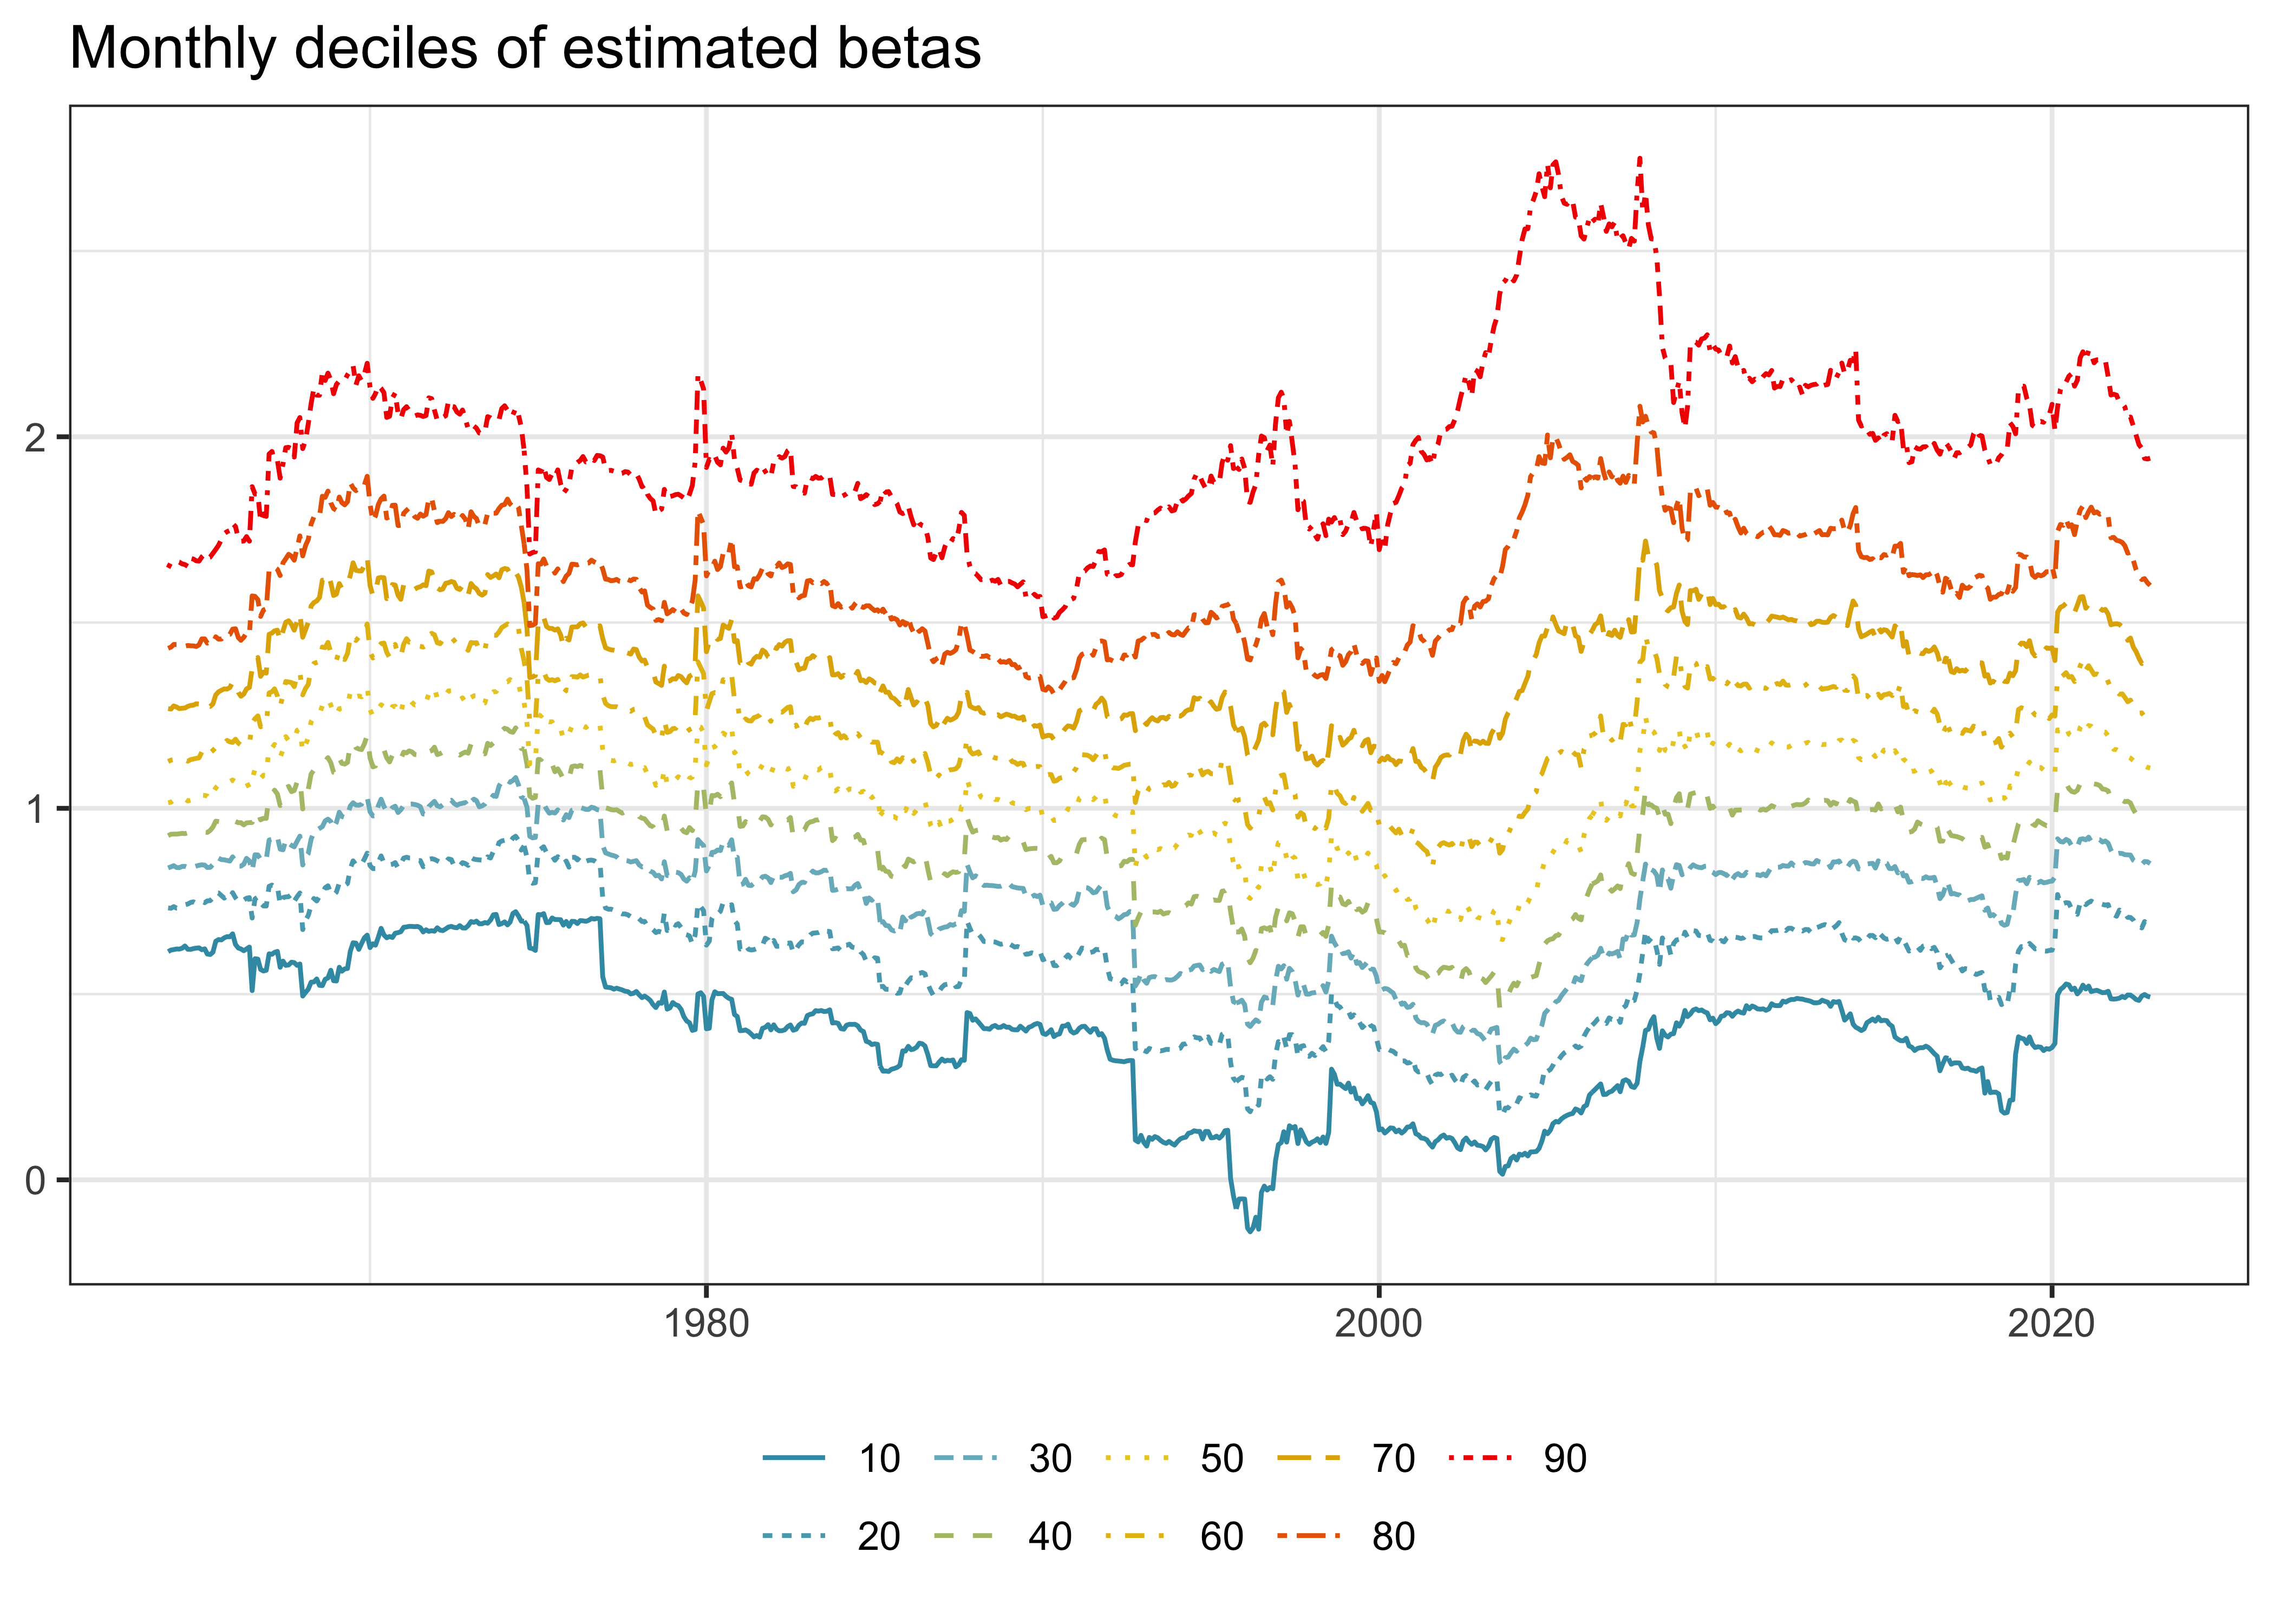 Title: Monthly deciles of estimated betas. The figure shows time series of deciles of estimated betas to illustrate the distribution of betas over time. The top 10 percent quantile on average is around 2 but varies substantially over time. The lowest 10 percent quantile is around 0.4 on average but is highly correlated with the top quantile such that in general CAPM market betas seem to go up and down jointly.